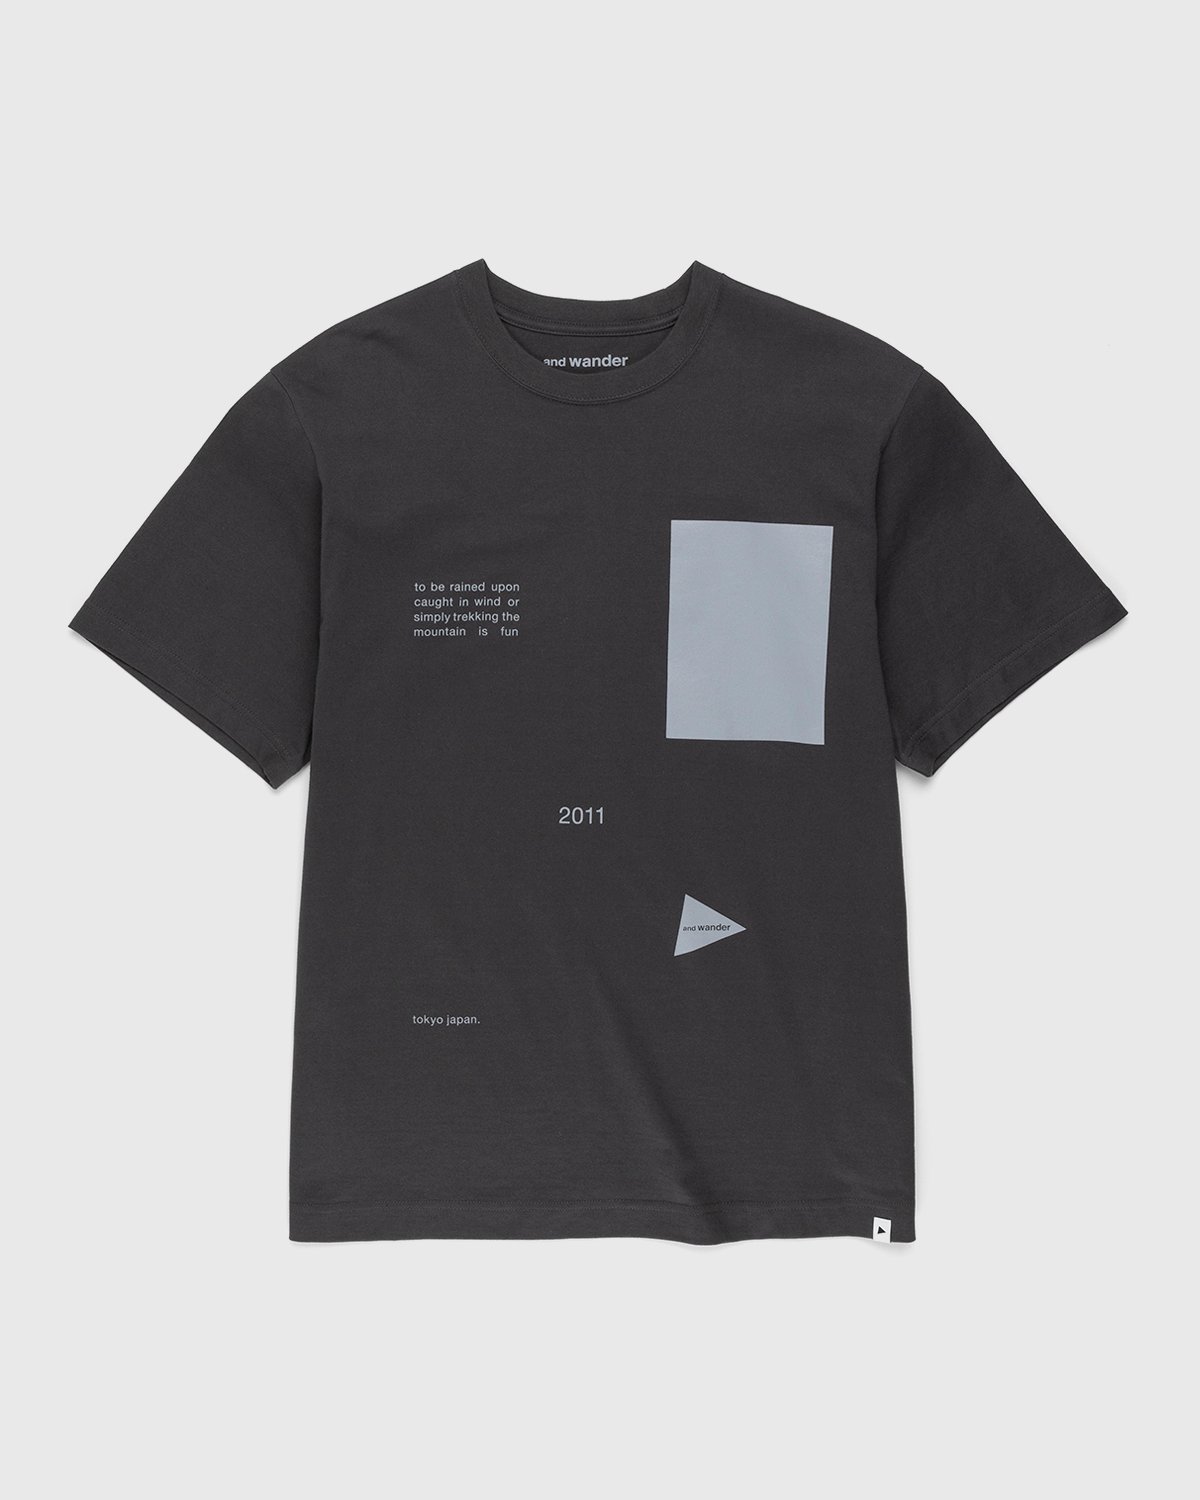 And Wander - Composition T-Shirt Charcoal - Clothing - Black - Image 1